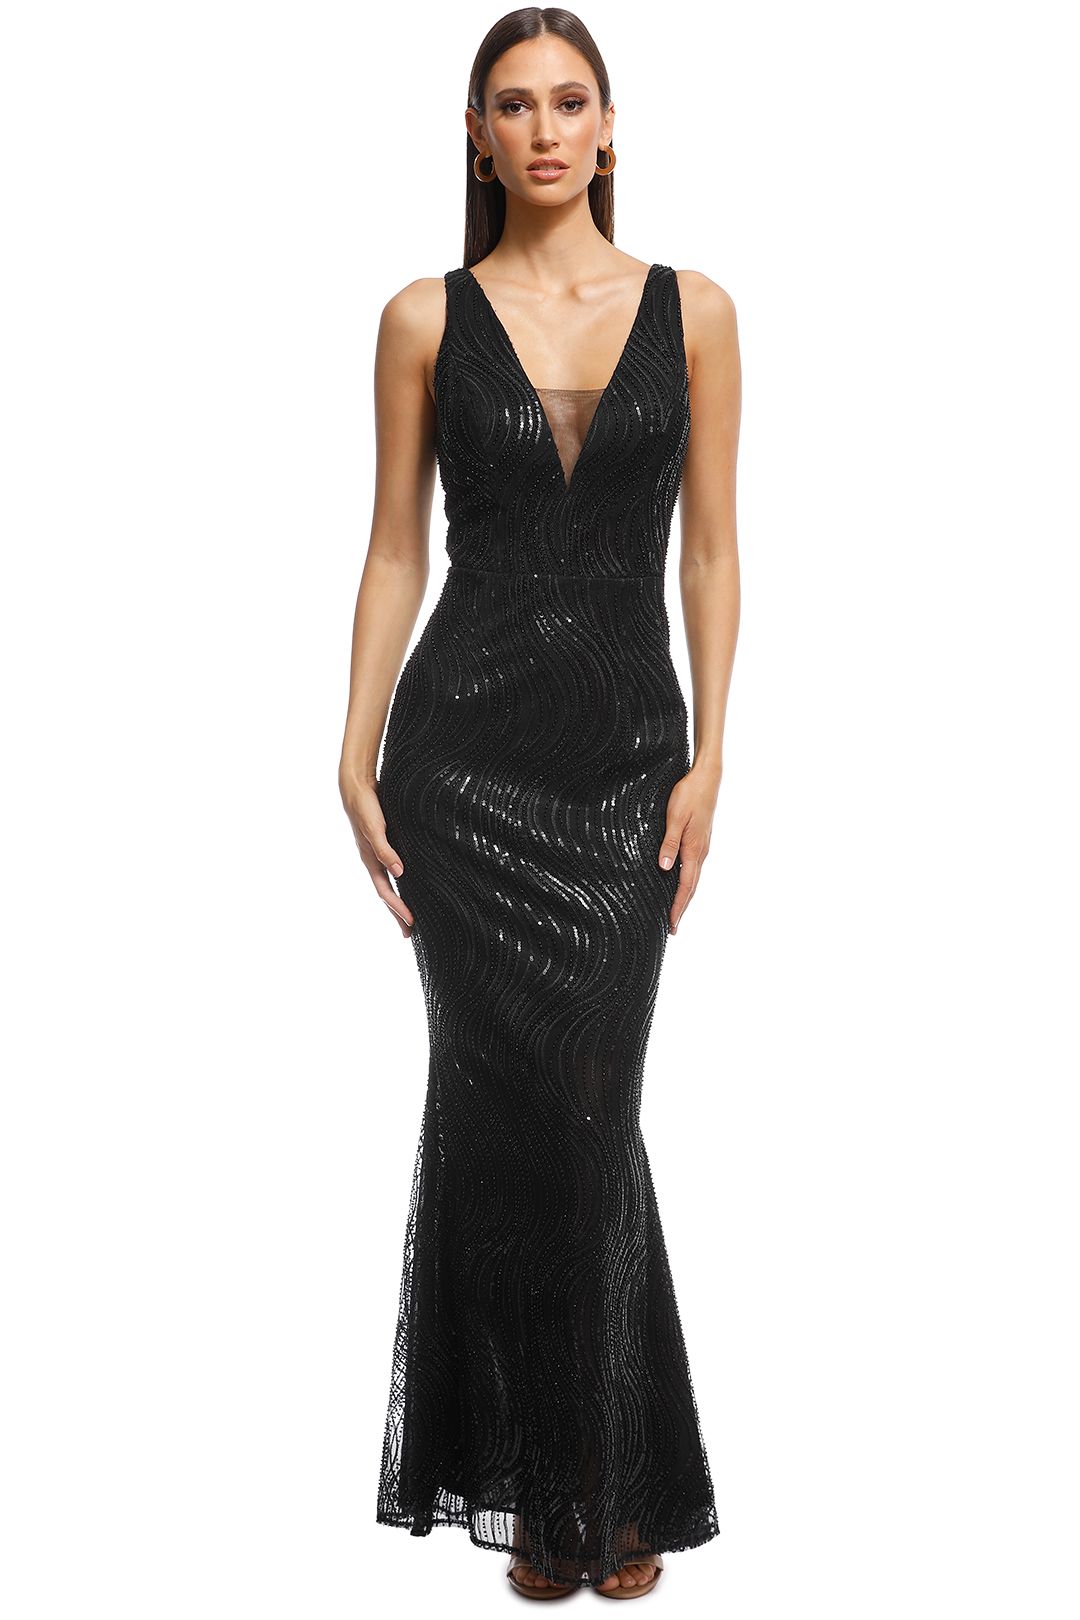 Grace and Hart - Tales and Spirits Gown - Black - Front